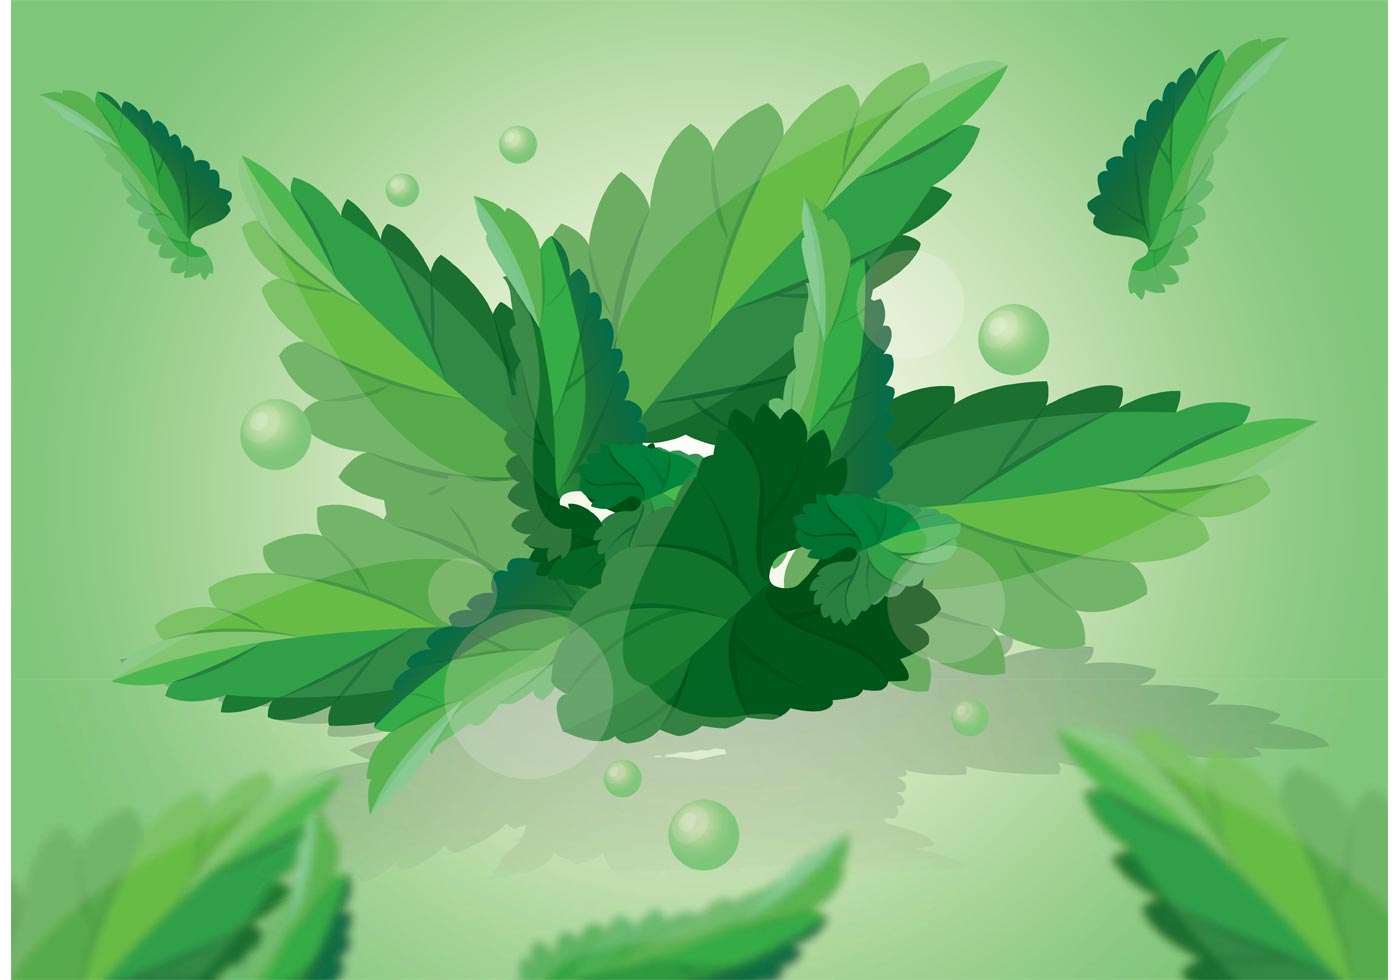 Green Mint Leaves Vector Download Free Vector Art, Stock